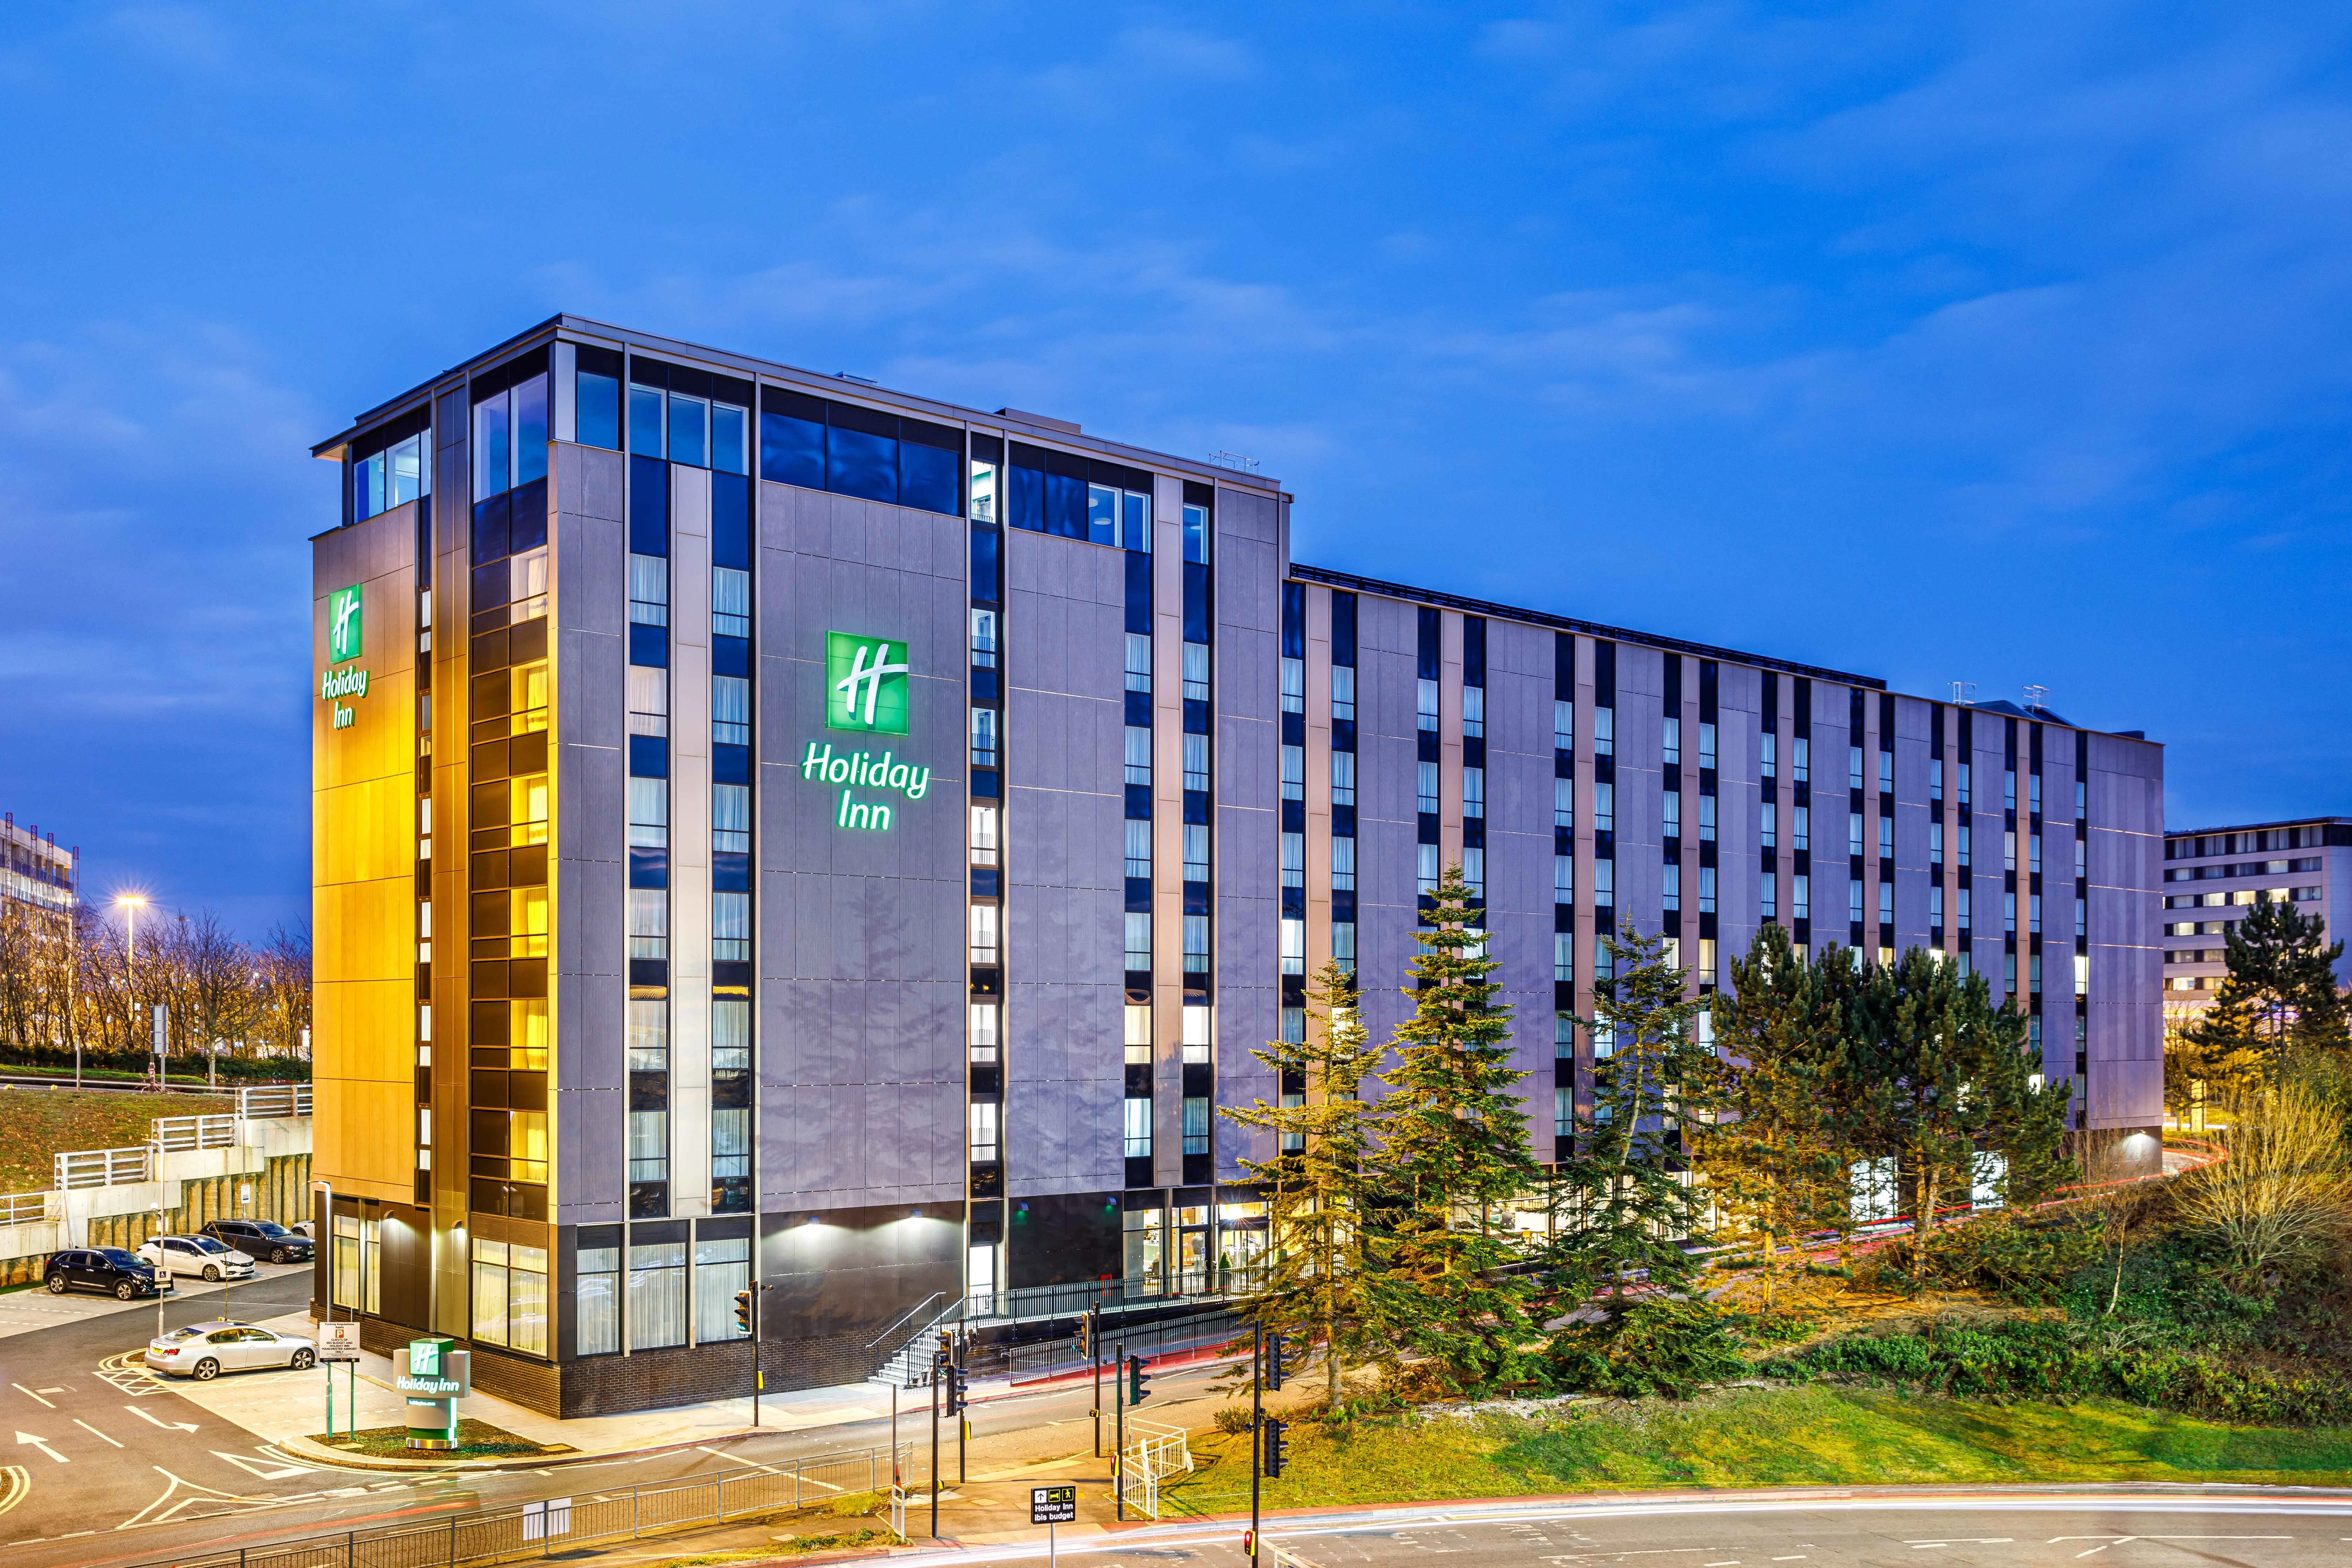 Building hotel Holiday Inn Manchester Airport